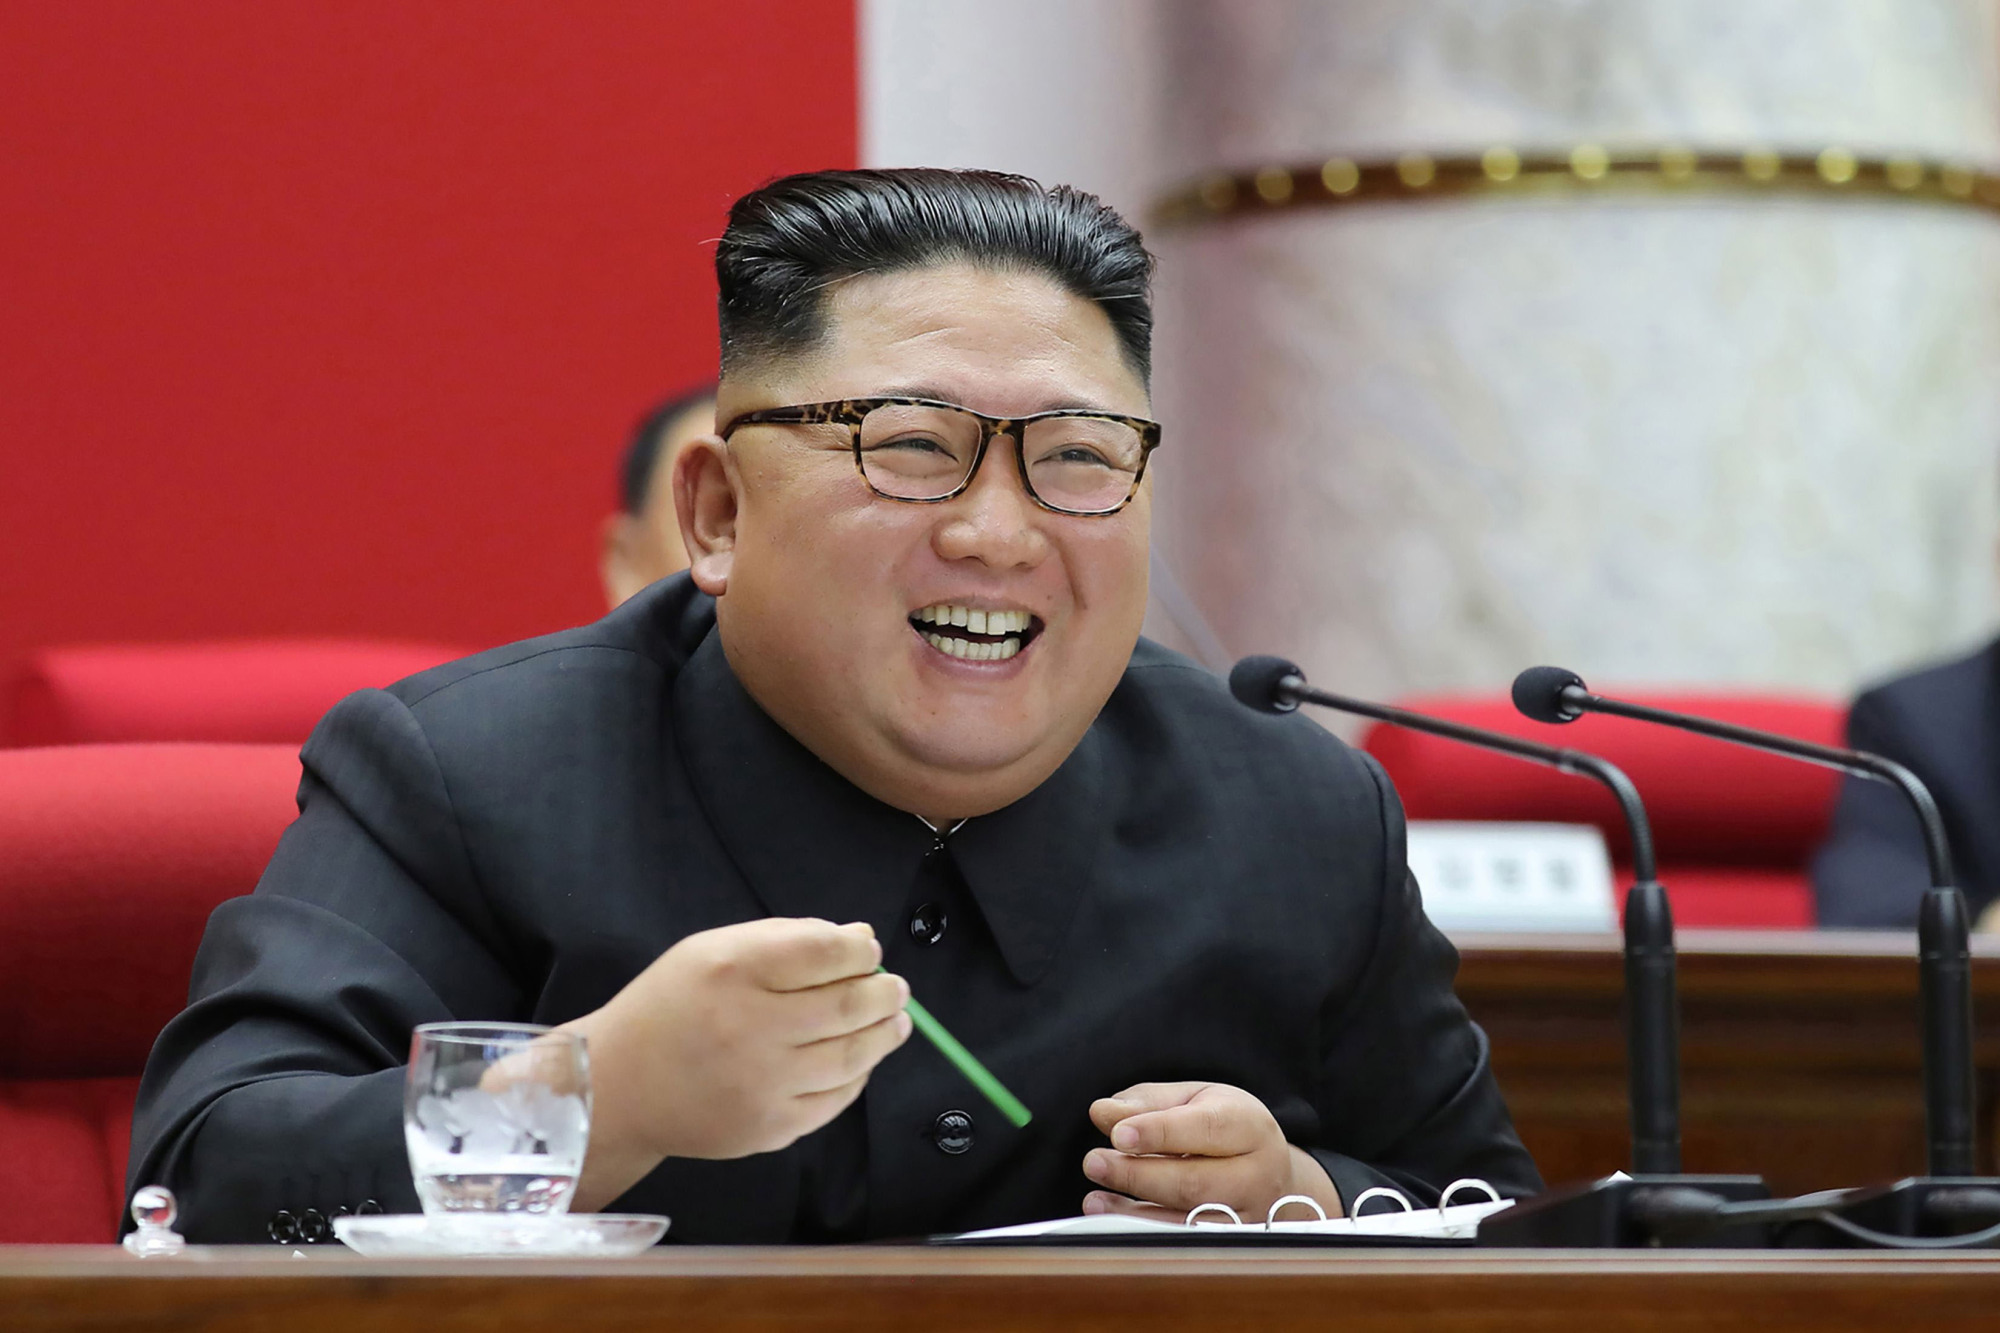 North Korean leader Kim Jong Un attends a session of the Fifth Plenary Meeting of the Seventh Central Committee of the Workers' Party of Korea. | KCNA / VIA KNS / VIA AFP-JIJI